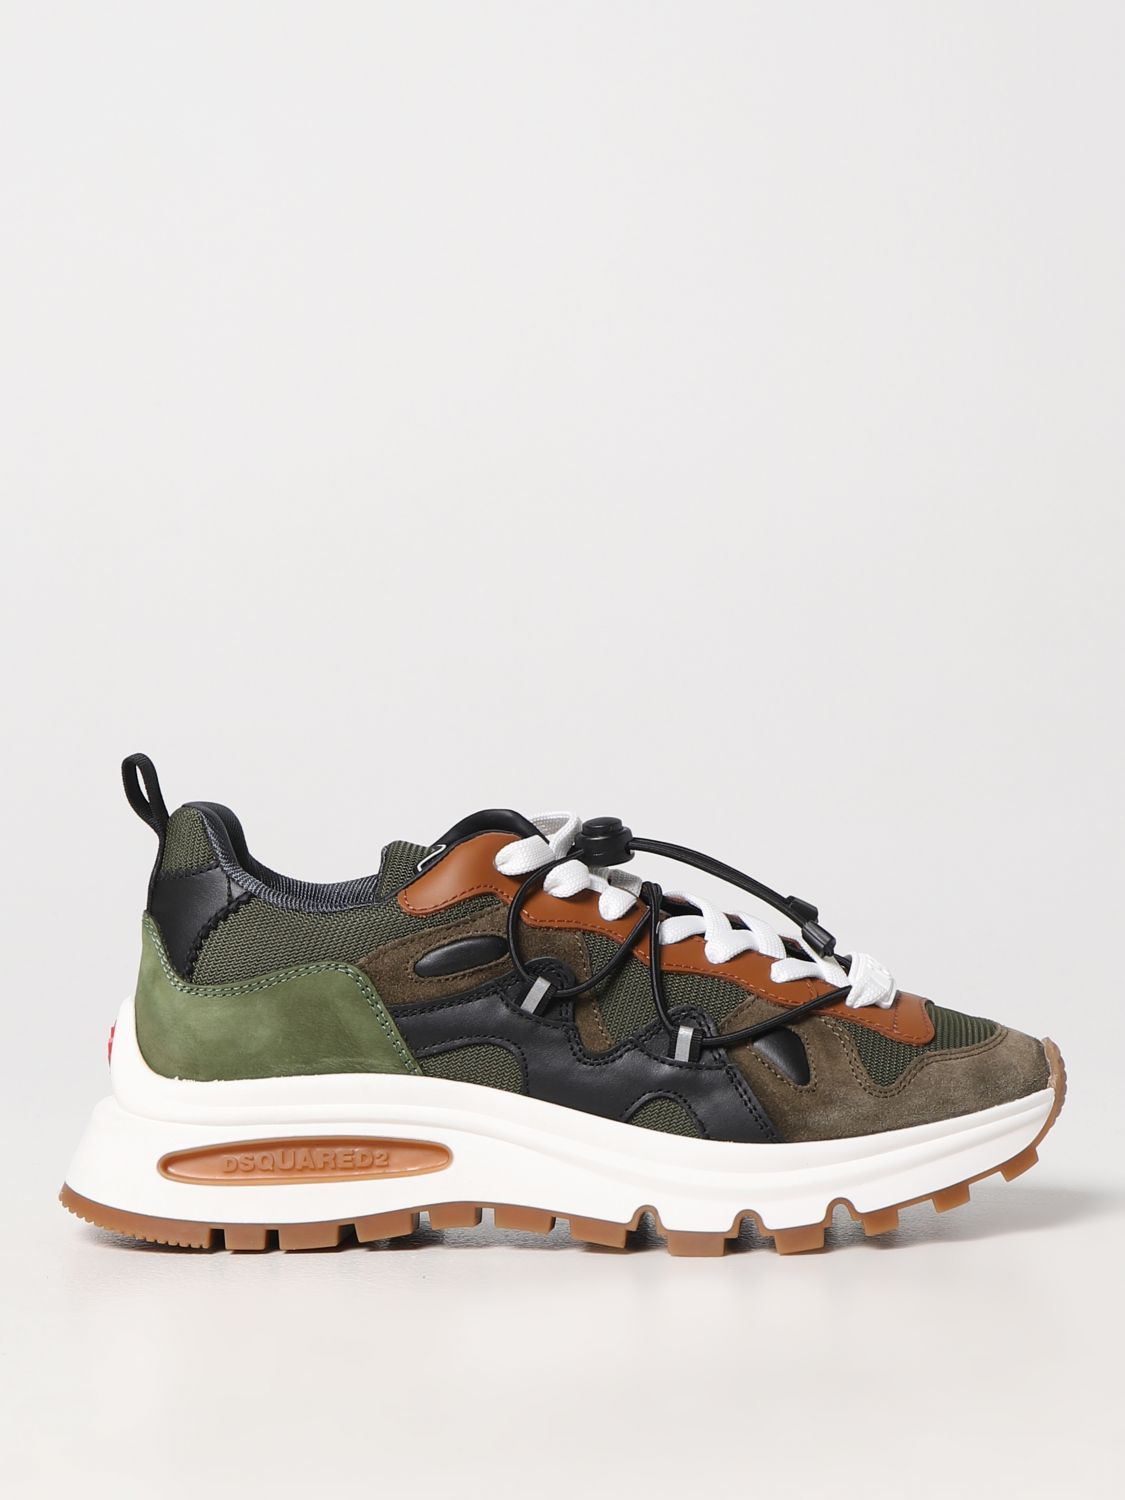 Zeggen Intensief Kruiden DSQUARED2: sneakers for man - Green | Dsquared2 sneakers SNM028008106244  online on GIGLIO.COM